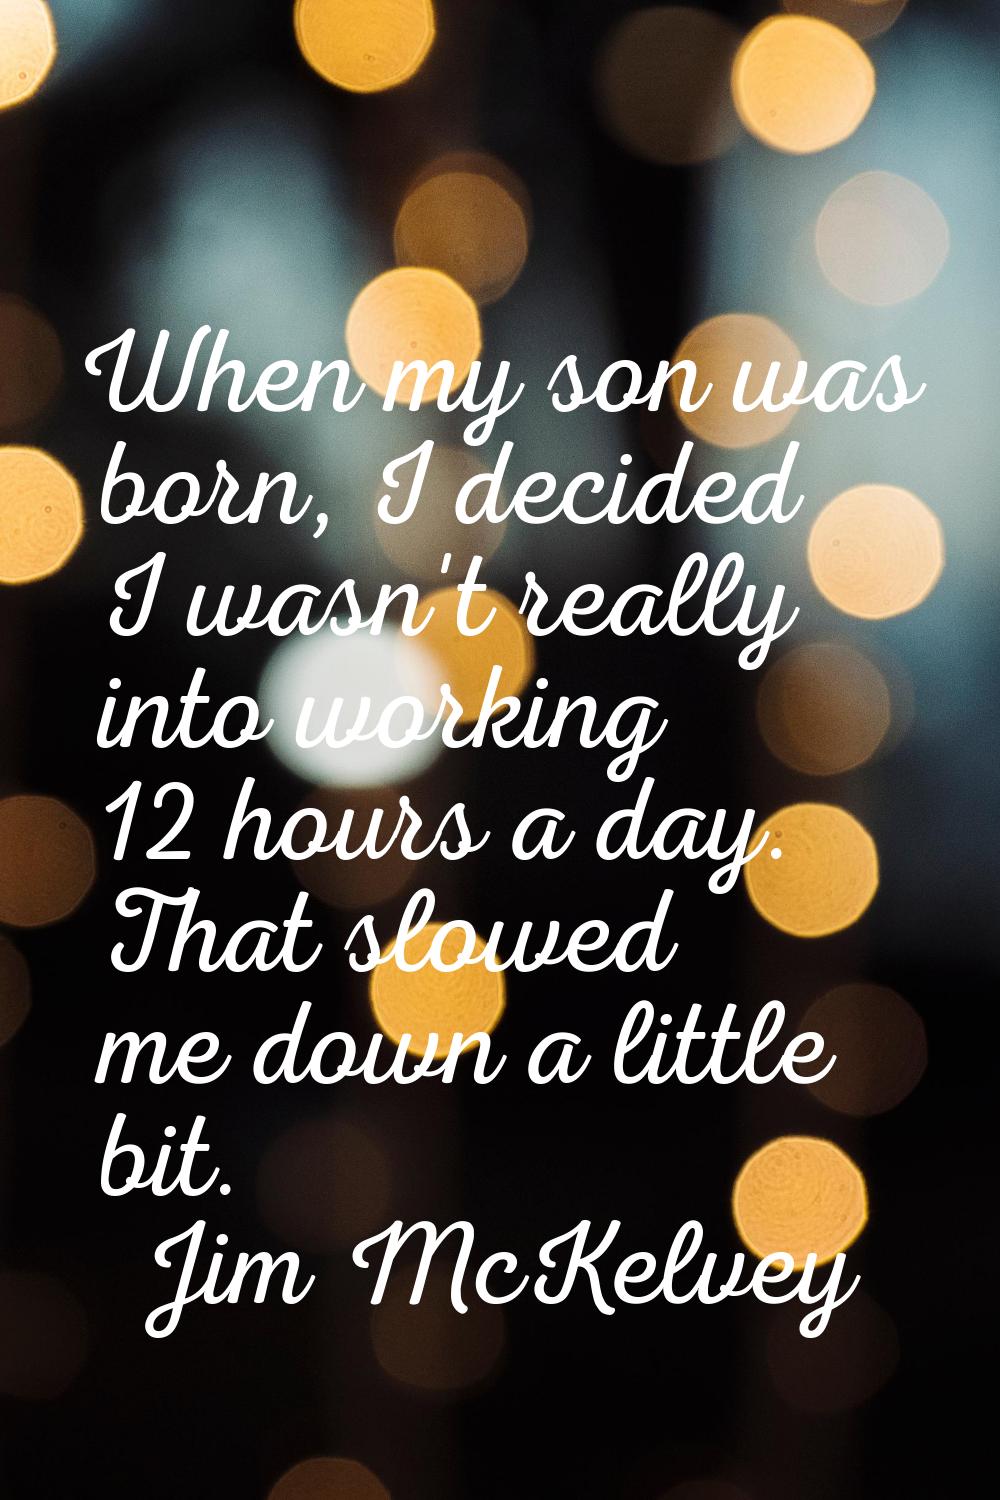 When my son was born, I decided I wasn't really into working 12 hours a day. That slowed me down a 